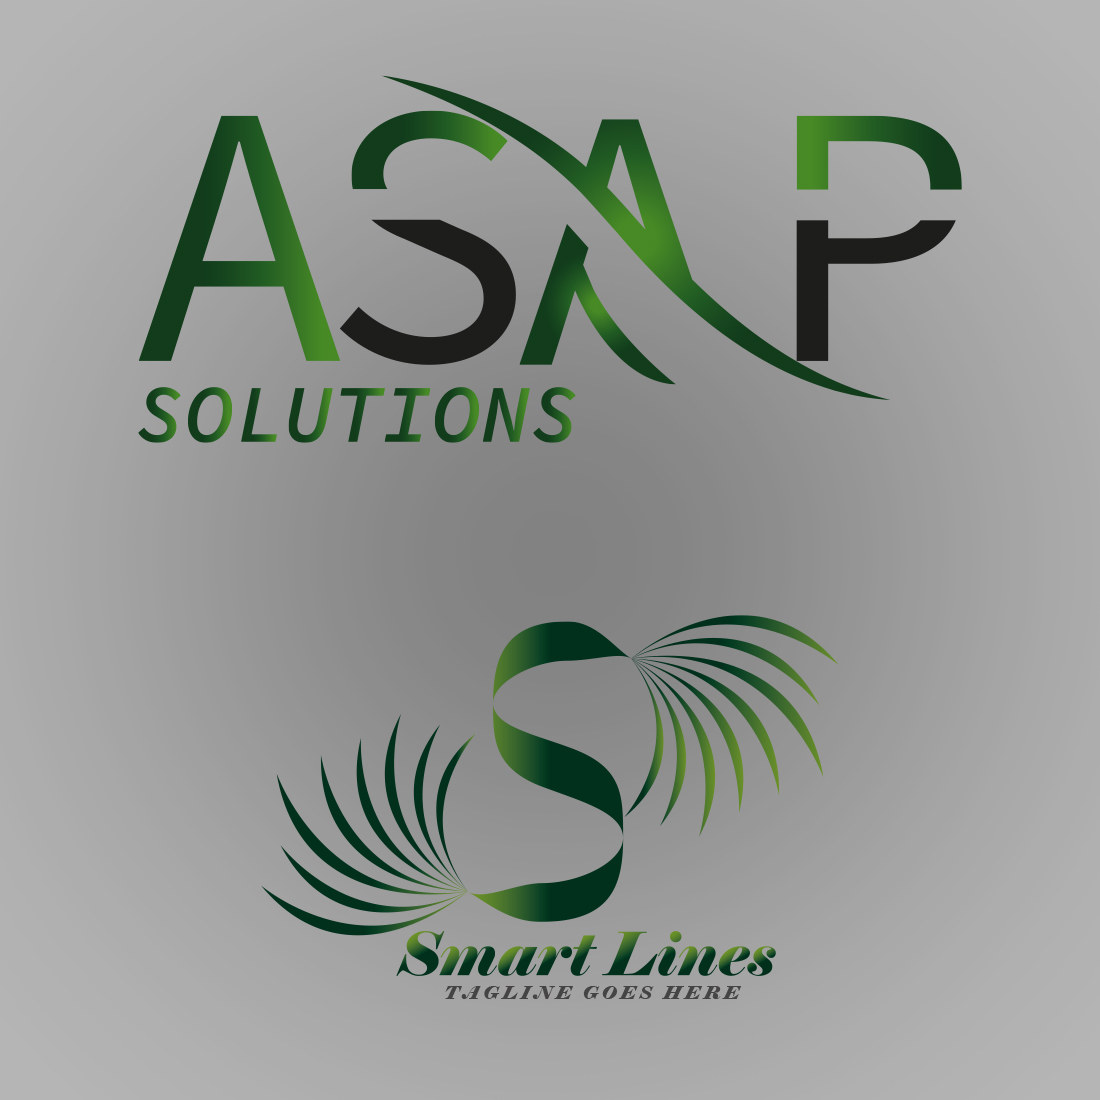 Cover image of A and S Letter Bundle Logos.